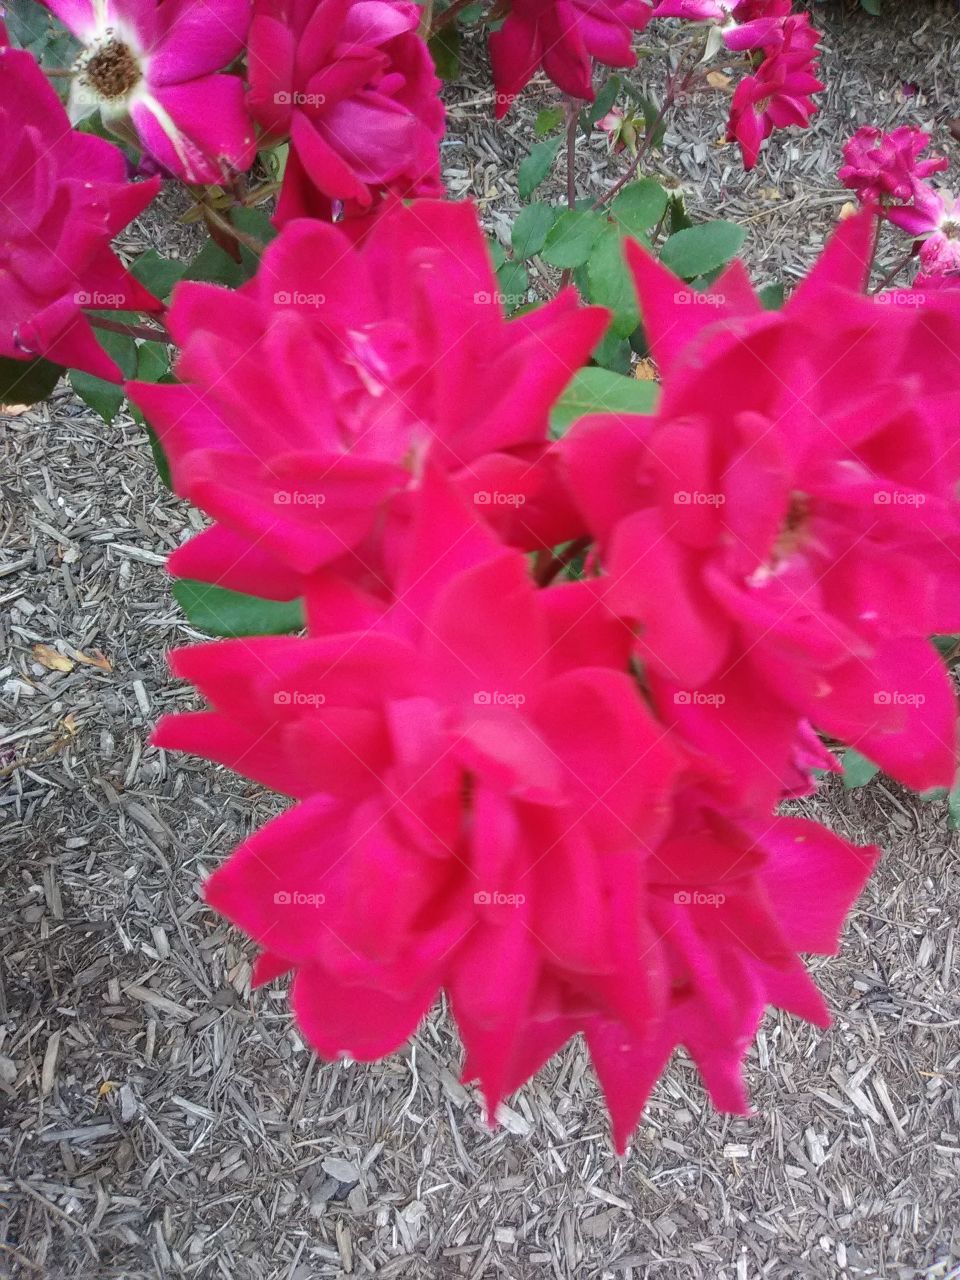 beautiful Pink flowers in the hustle and bustle of the city.